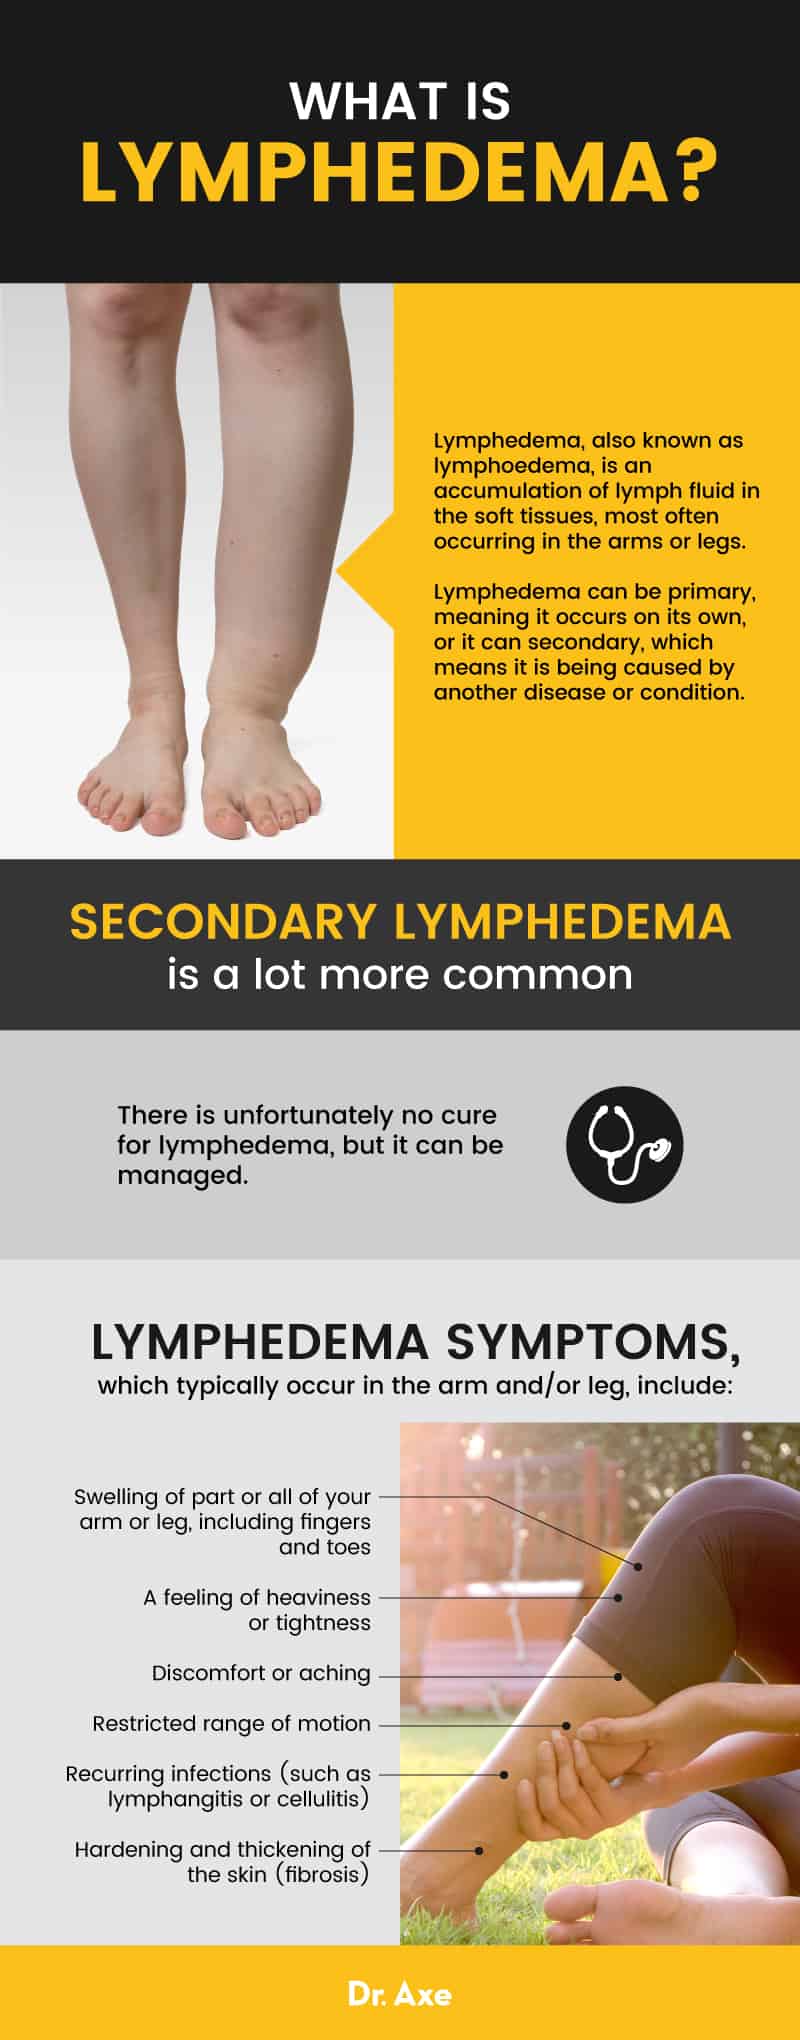 Lymphedema + 7 natural ways to manage lymphedema symptoms - Dr. Axe